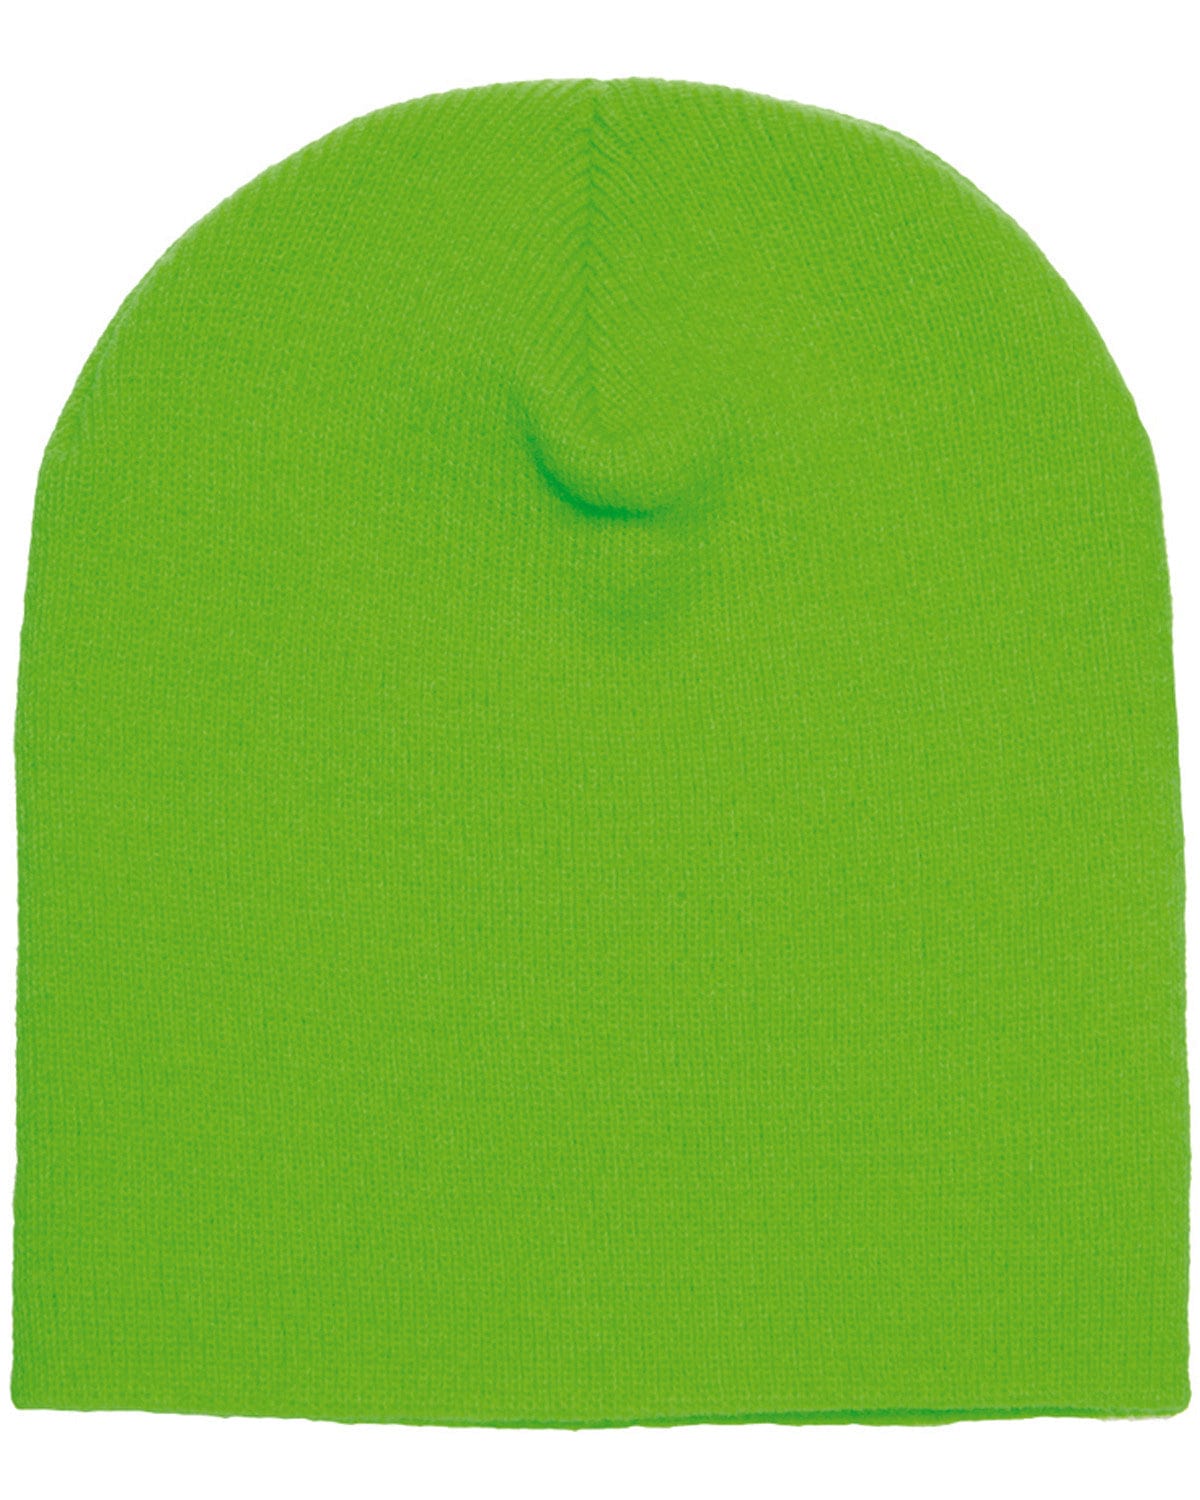 Yupoong Adult 1500: Beanie Knit